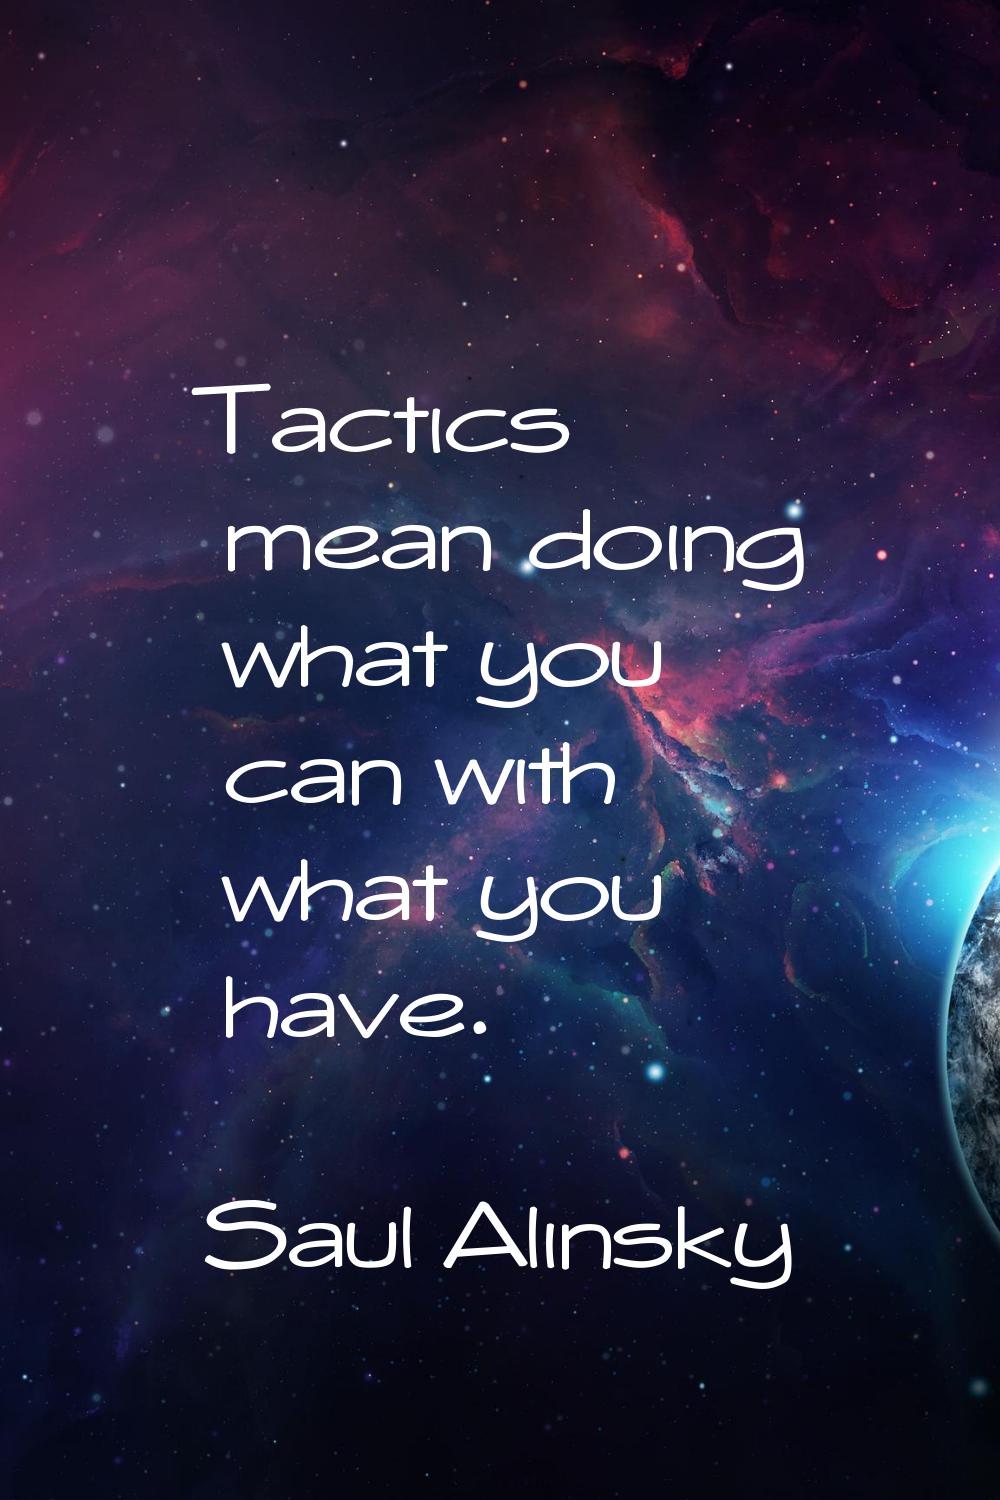 Tactics mean doing what you can with what you have.